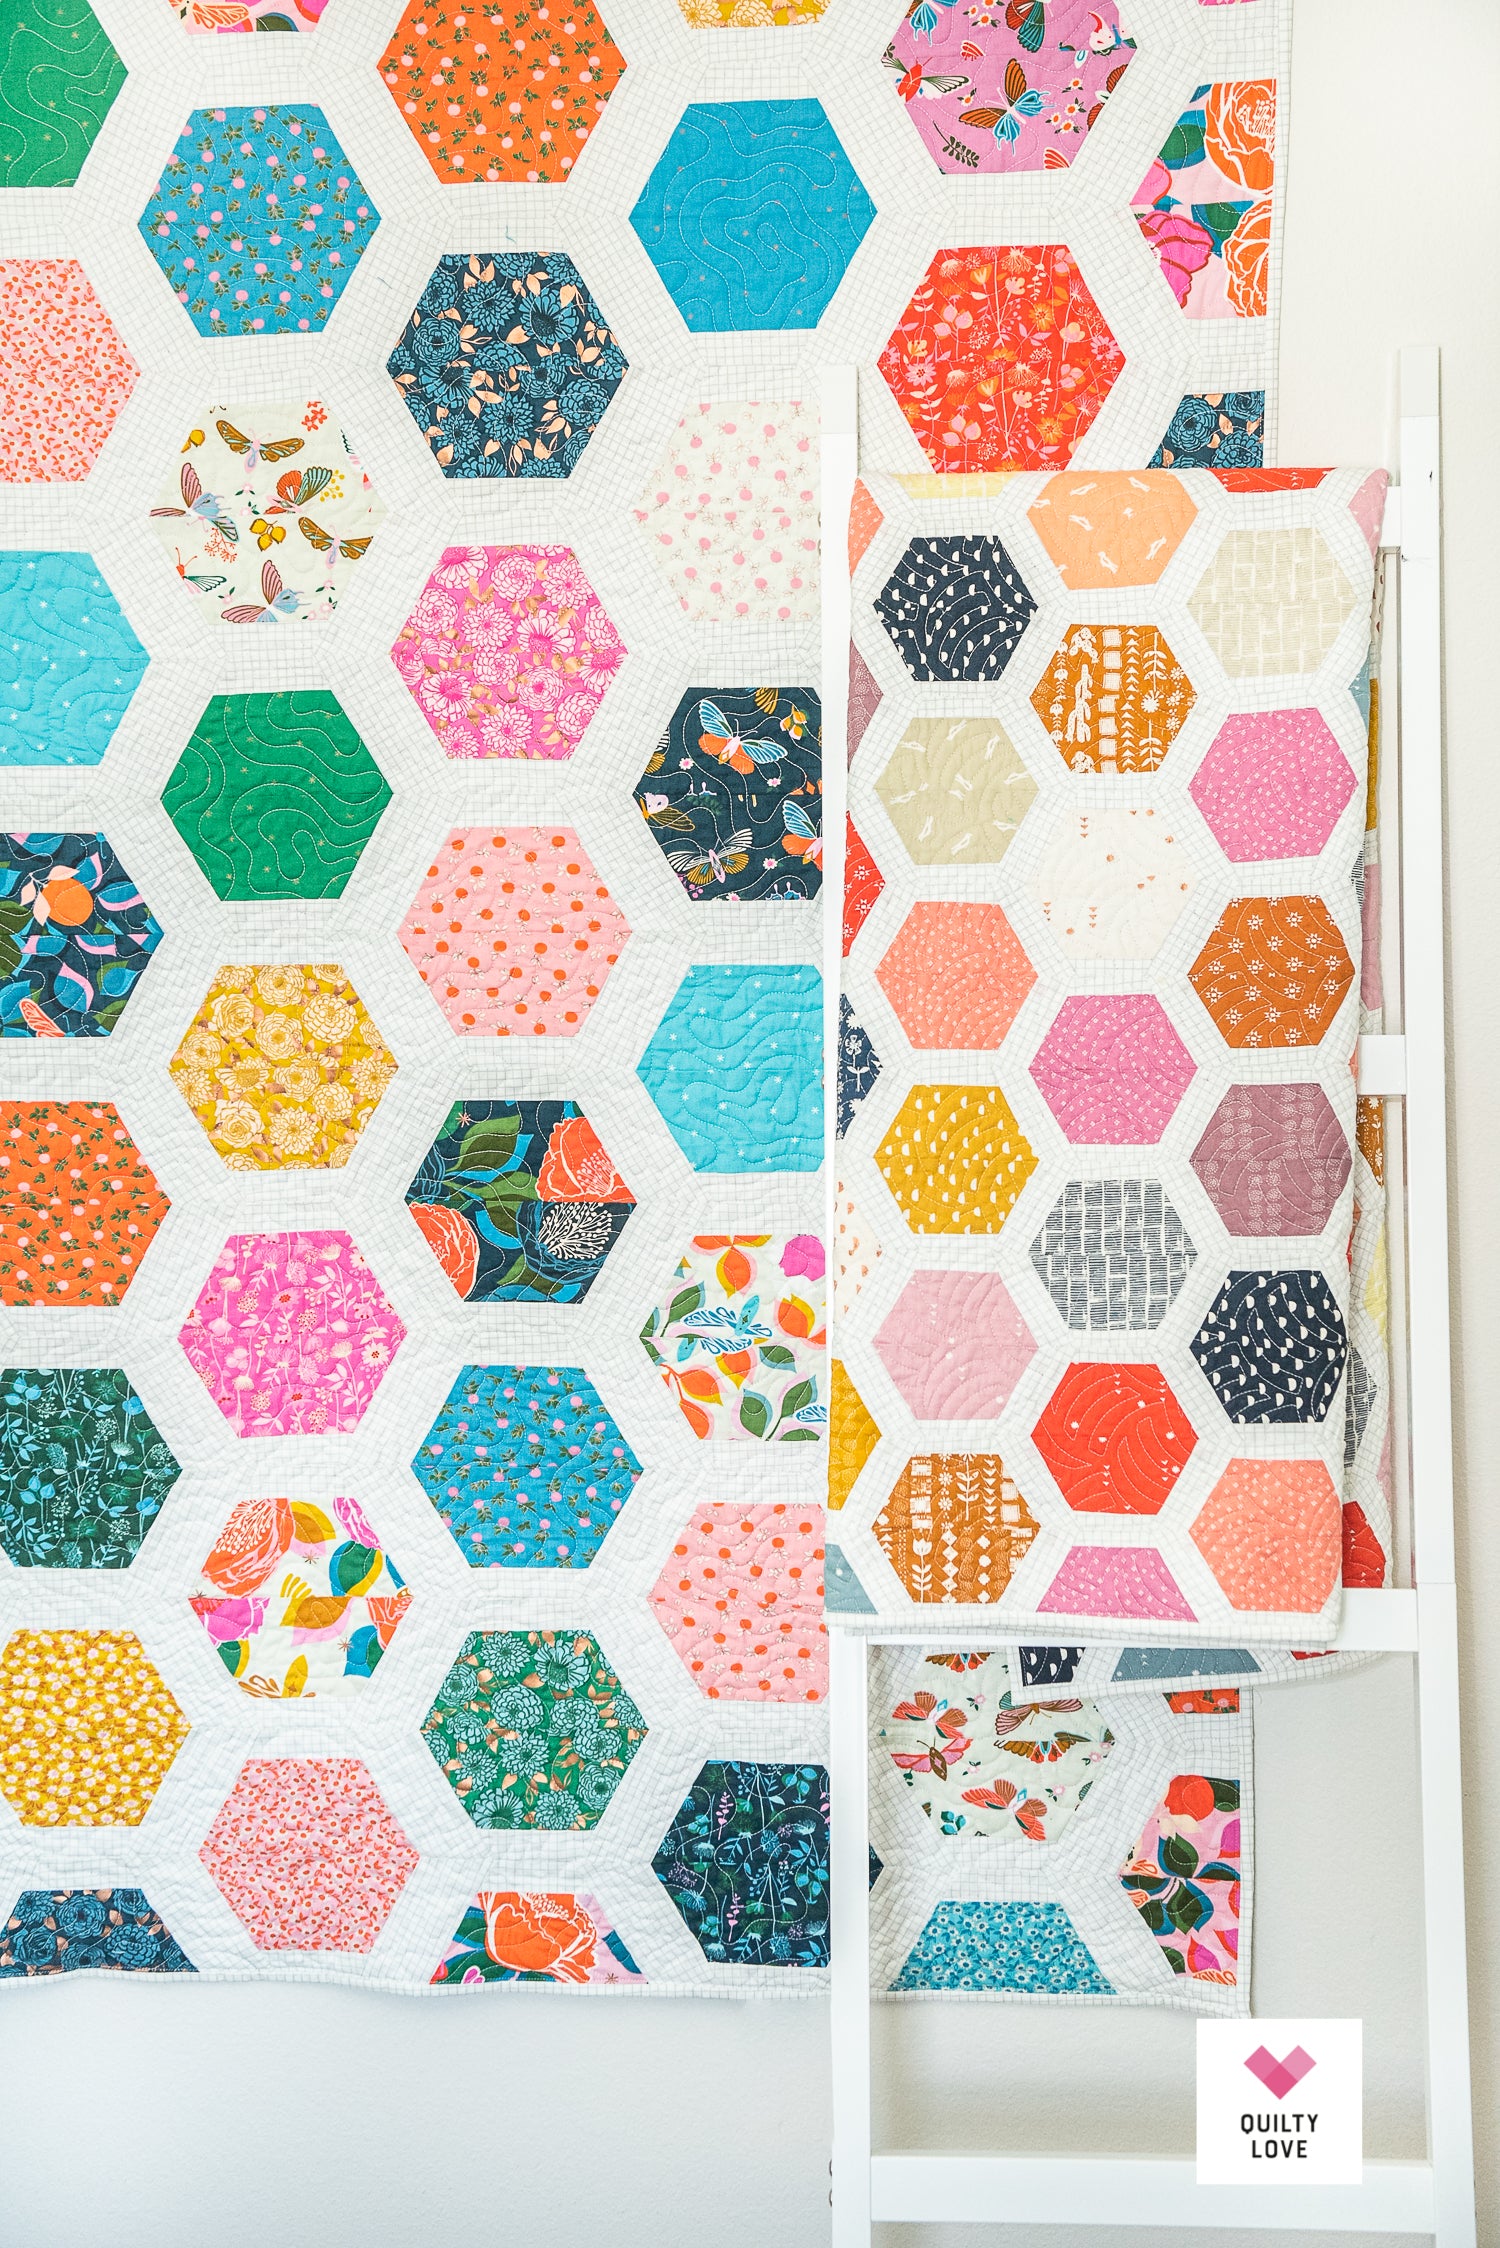 OzQuilts Framed Quilt-As-You-Go Hexagons Set - OzQuilts